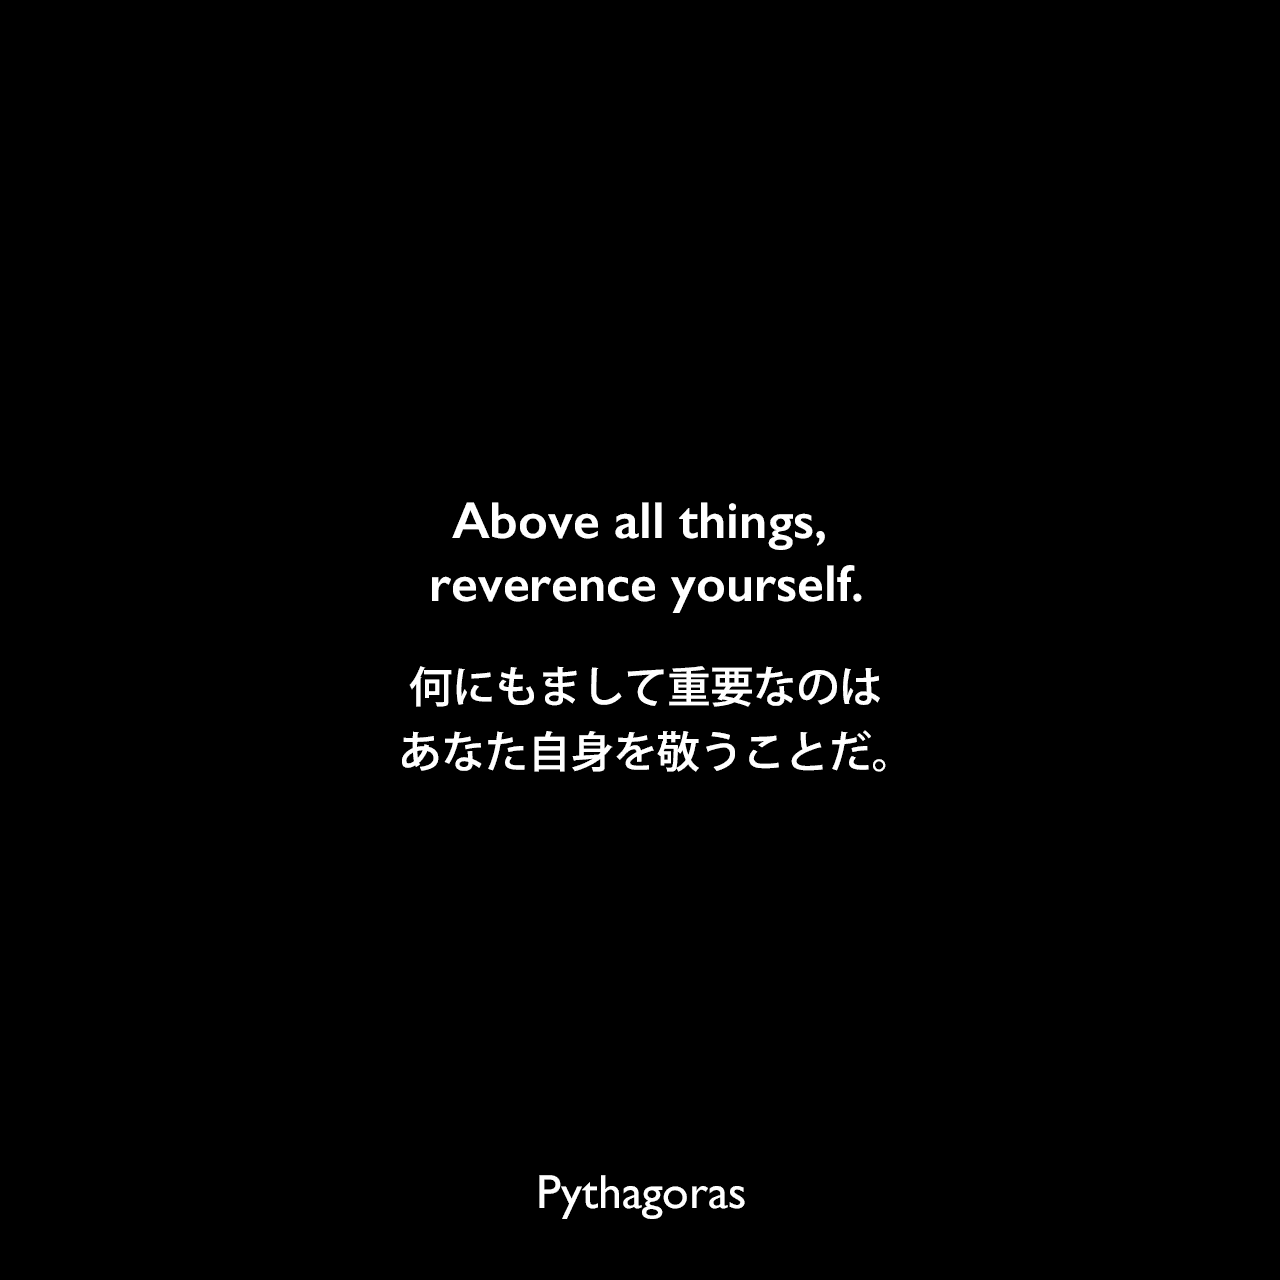 Above all things, reverence yourself.何にもまして重要なのは、あなた自身を敬うことだ。